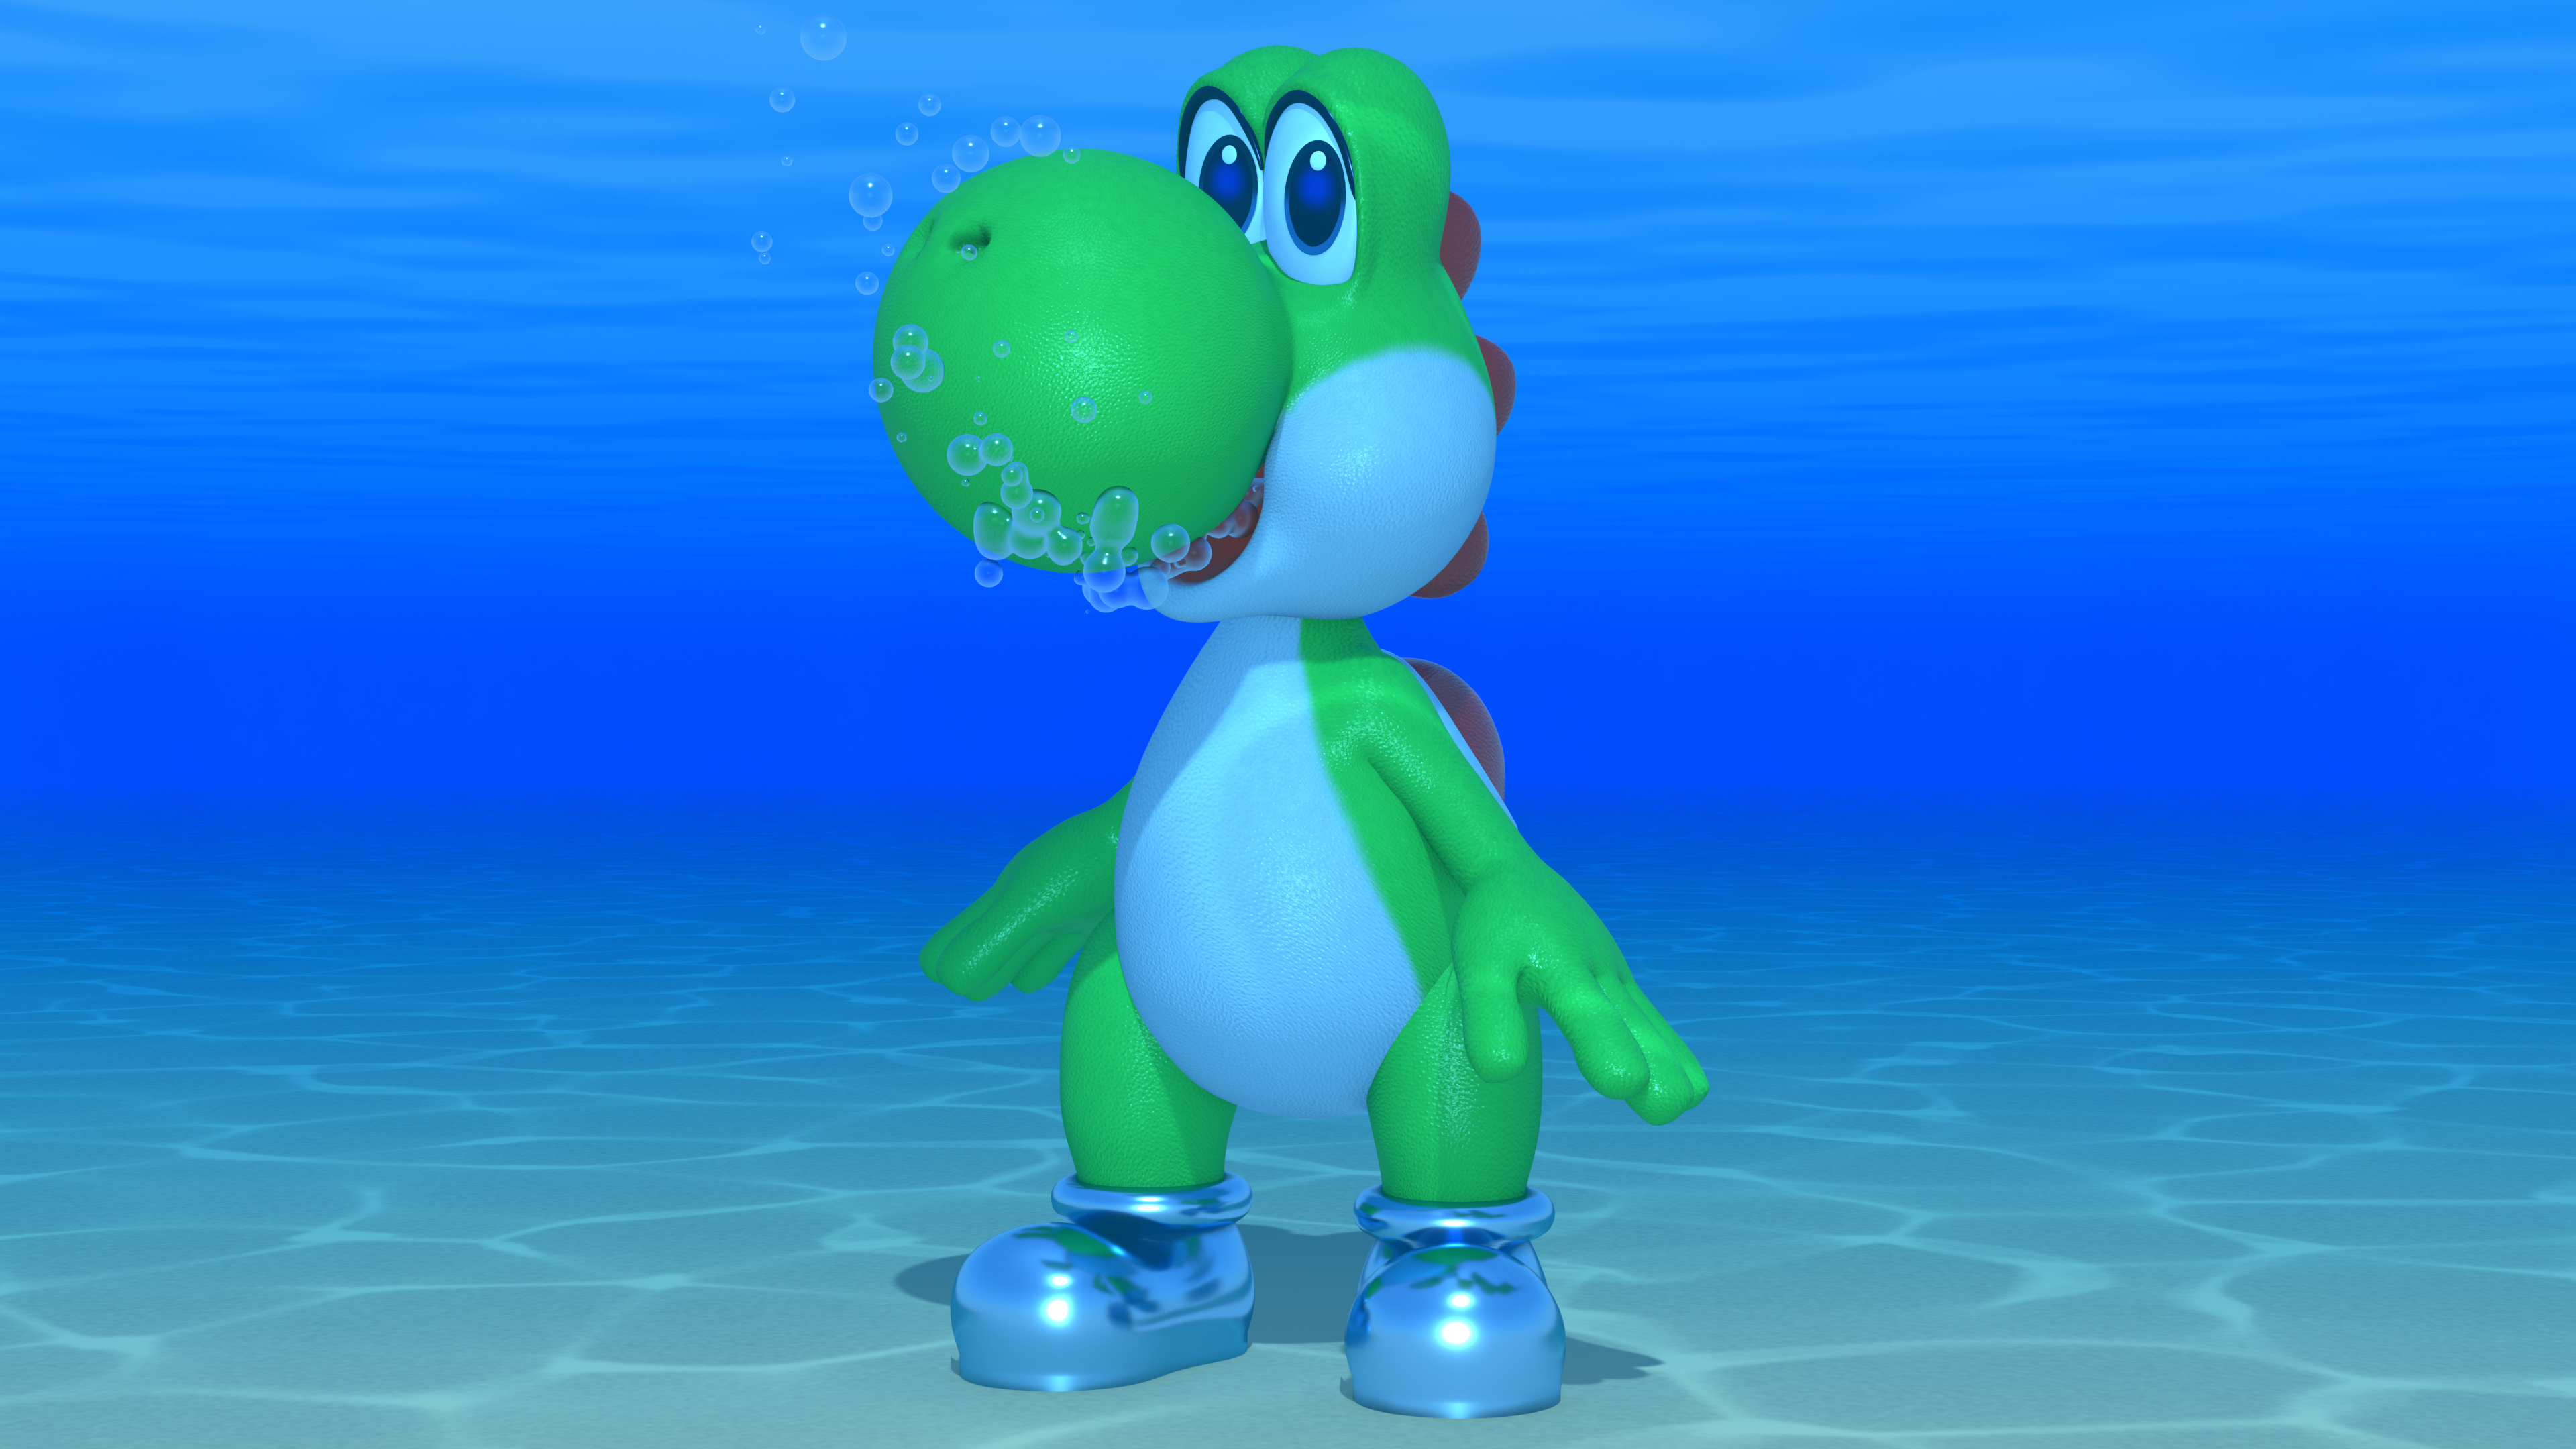 Yoshi underwater with the metal shoes 2 by kuby64 on DeviantArt